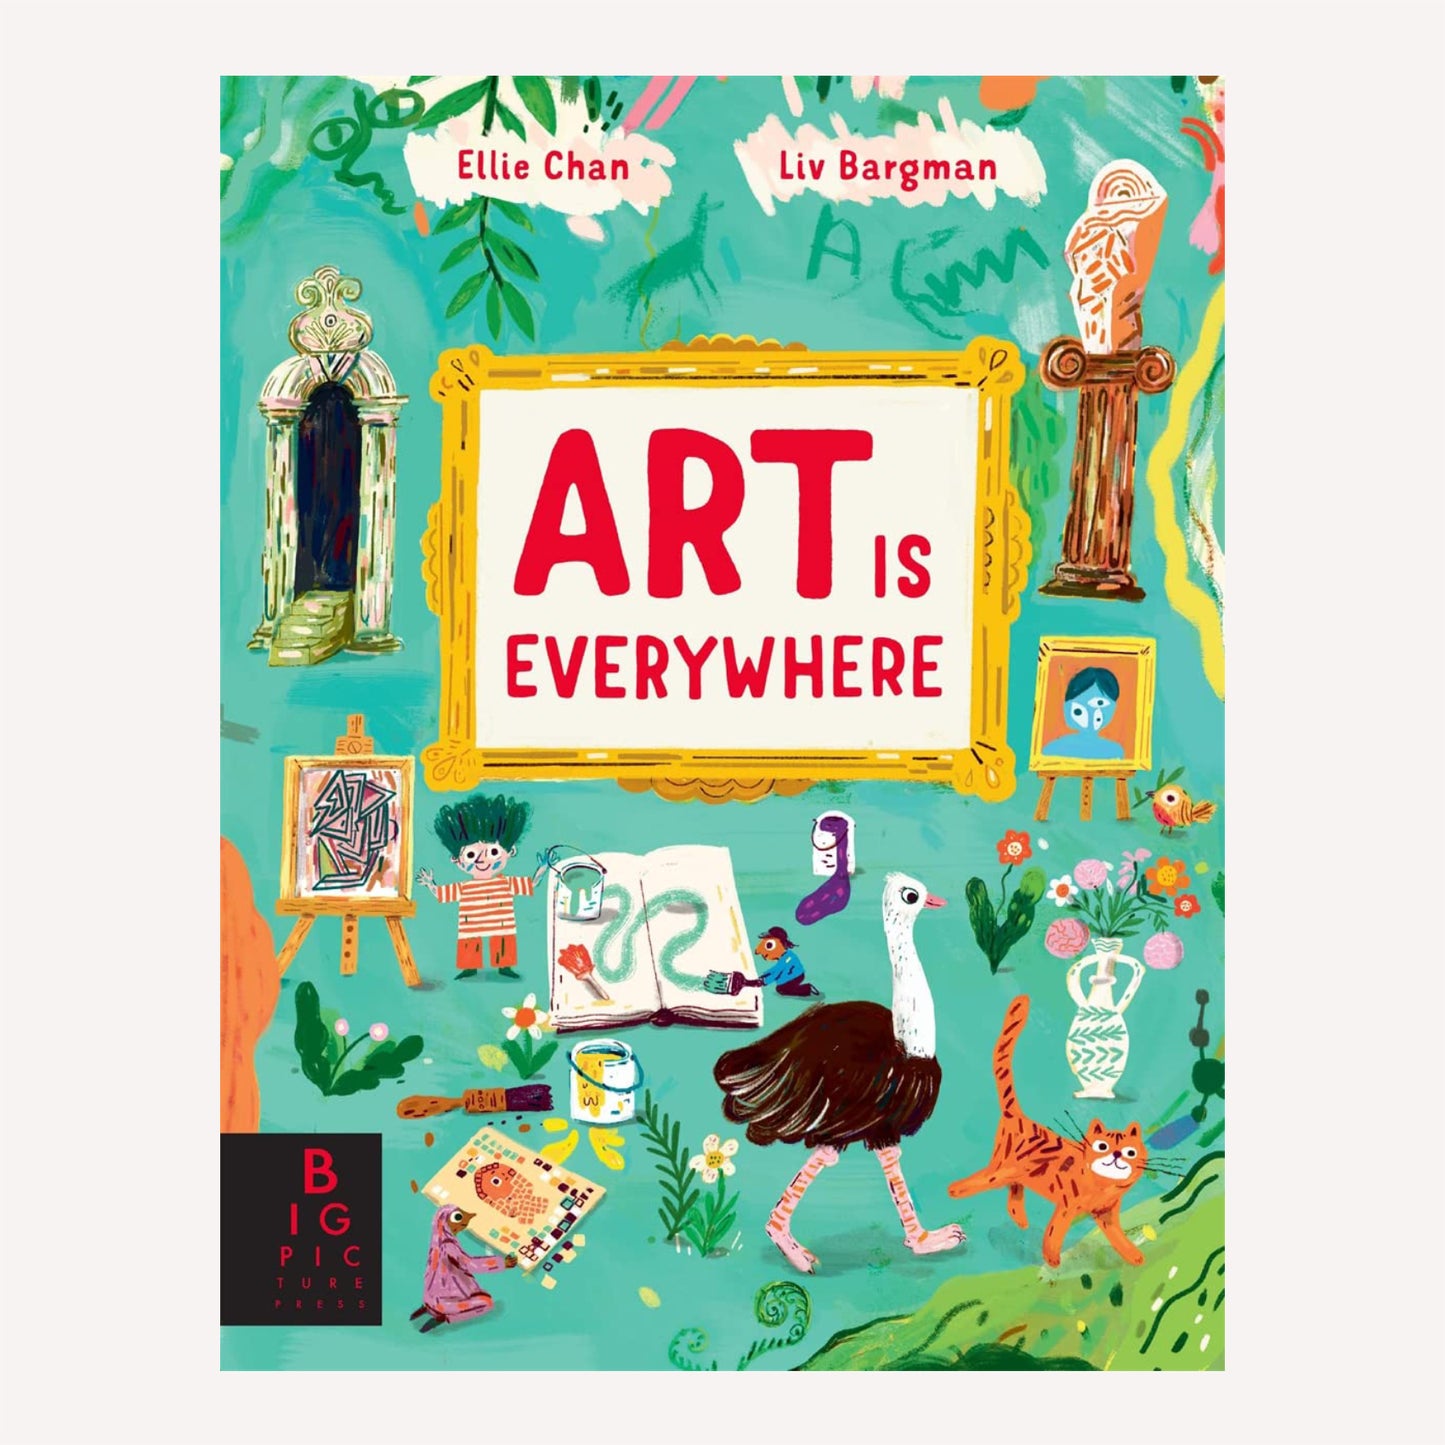 Book cover titled “Art is Everywhere” by Ellie Chan and Liv Bargman. The cover is illustrated with colourful works of art and features the main character of the story, Keith the ostrich. 